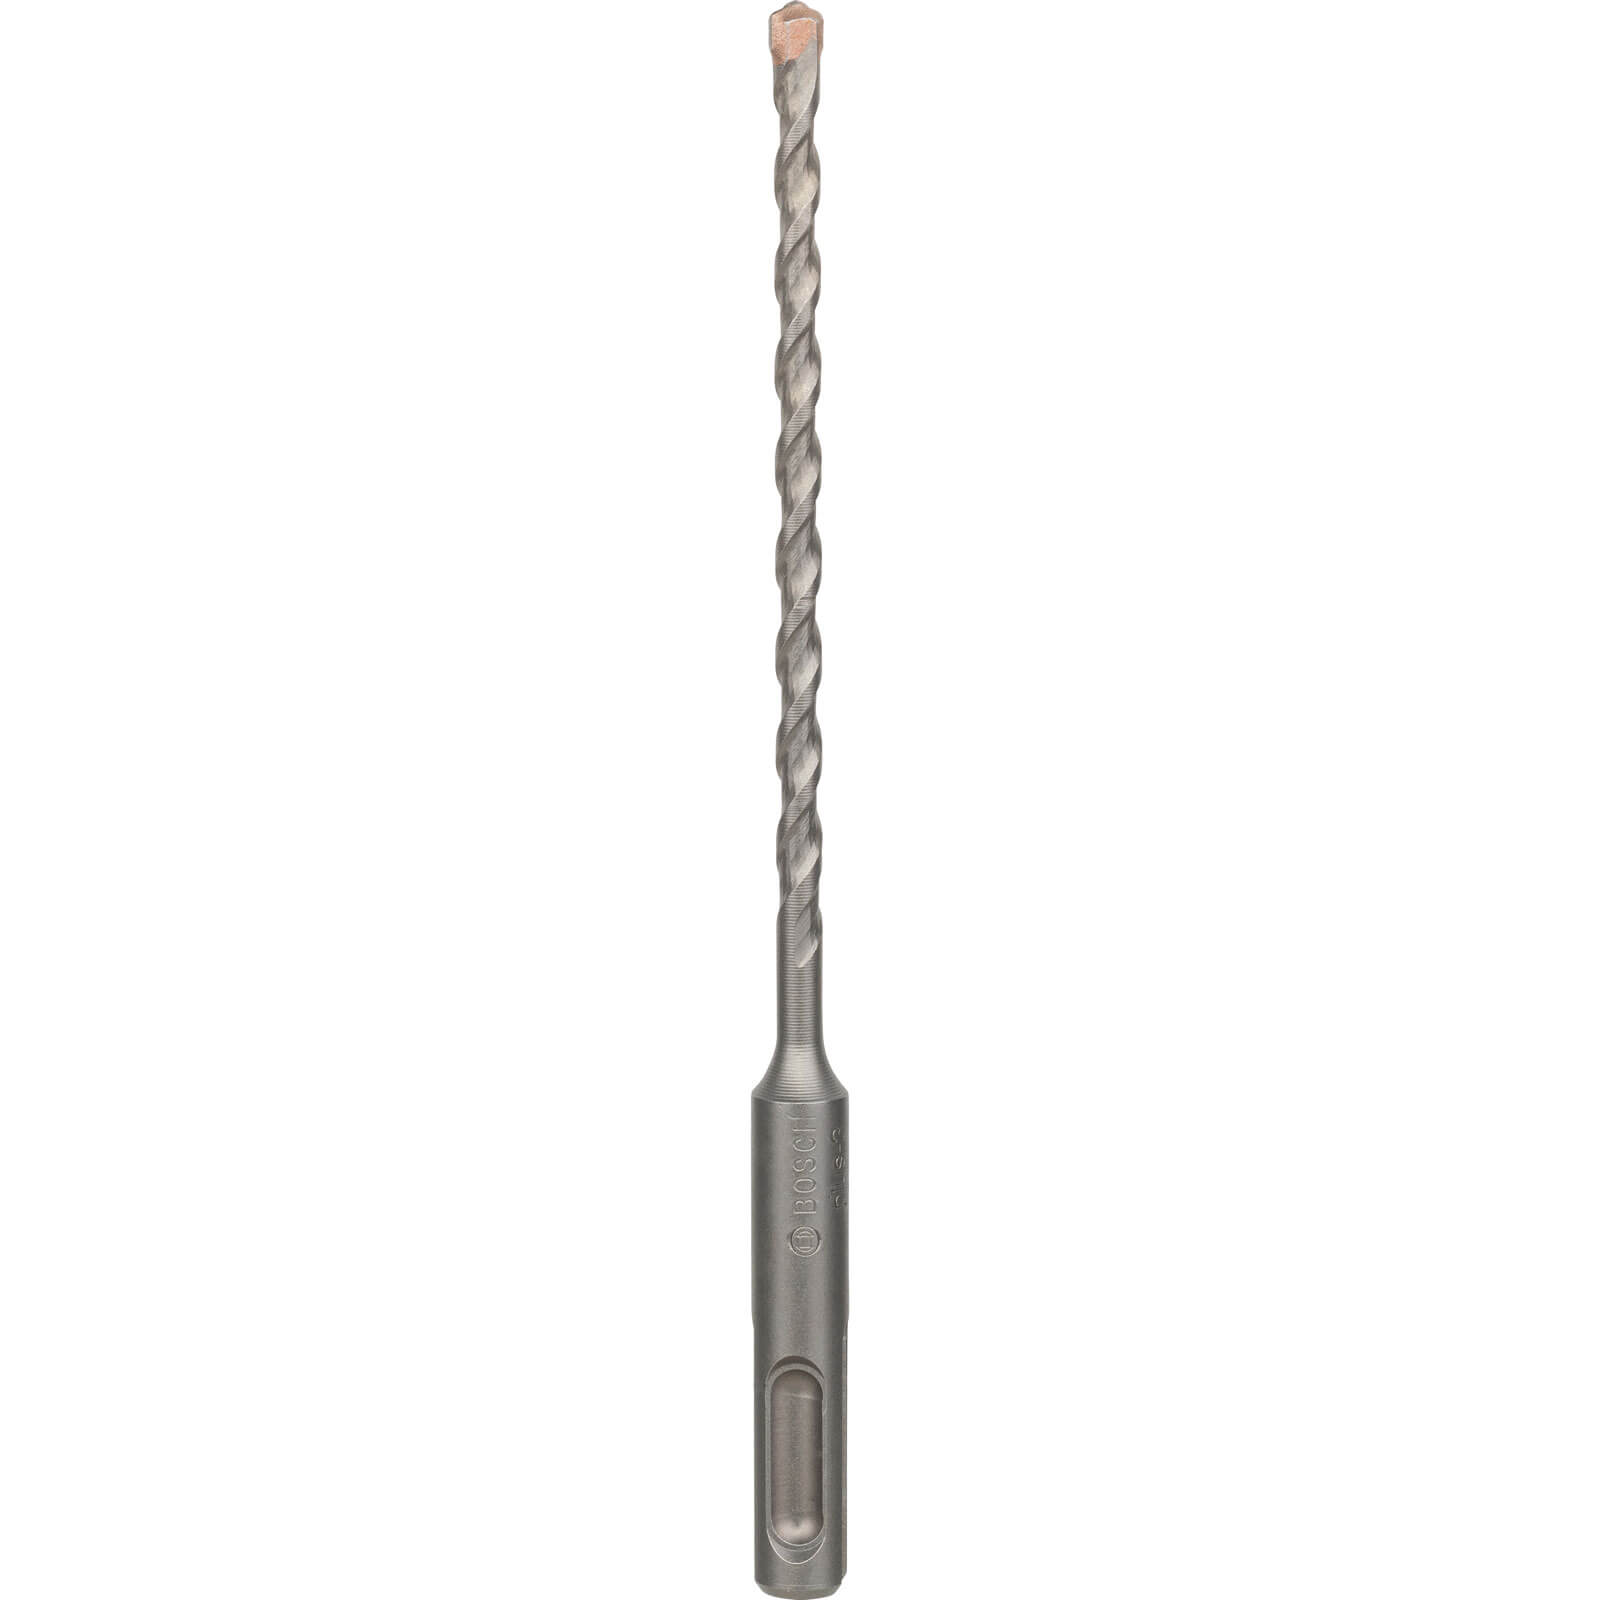 Image of Bosch Series 3 SDS Plus Masonry Drill Bit 5.5mm 160mm Pack of 1